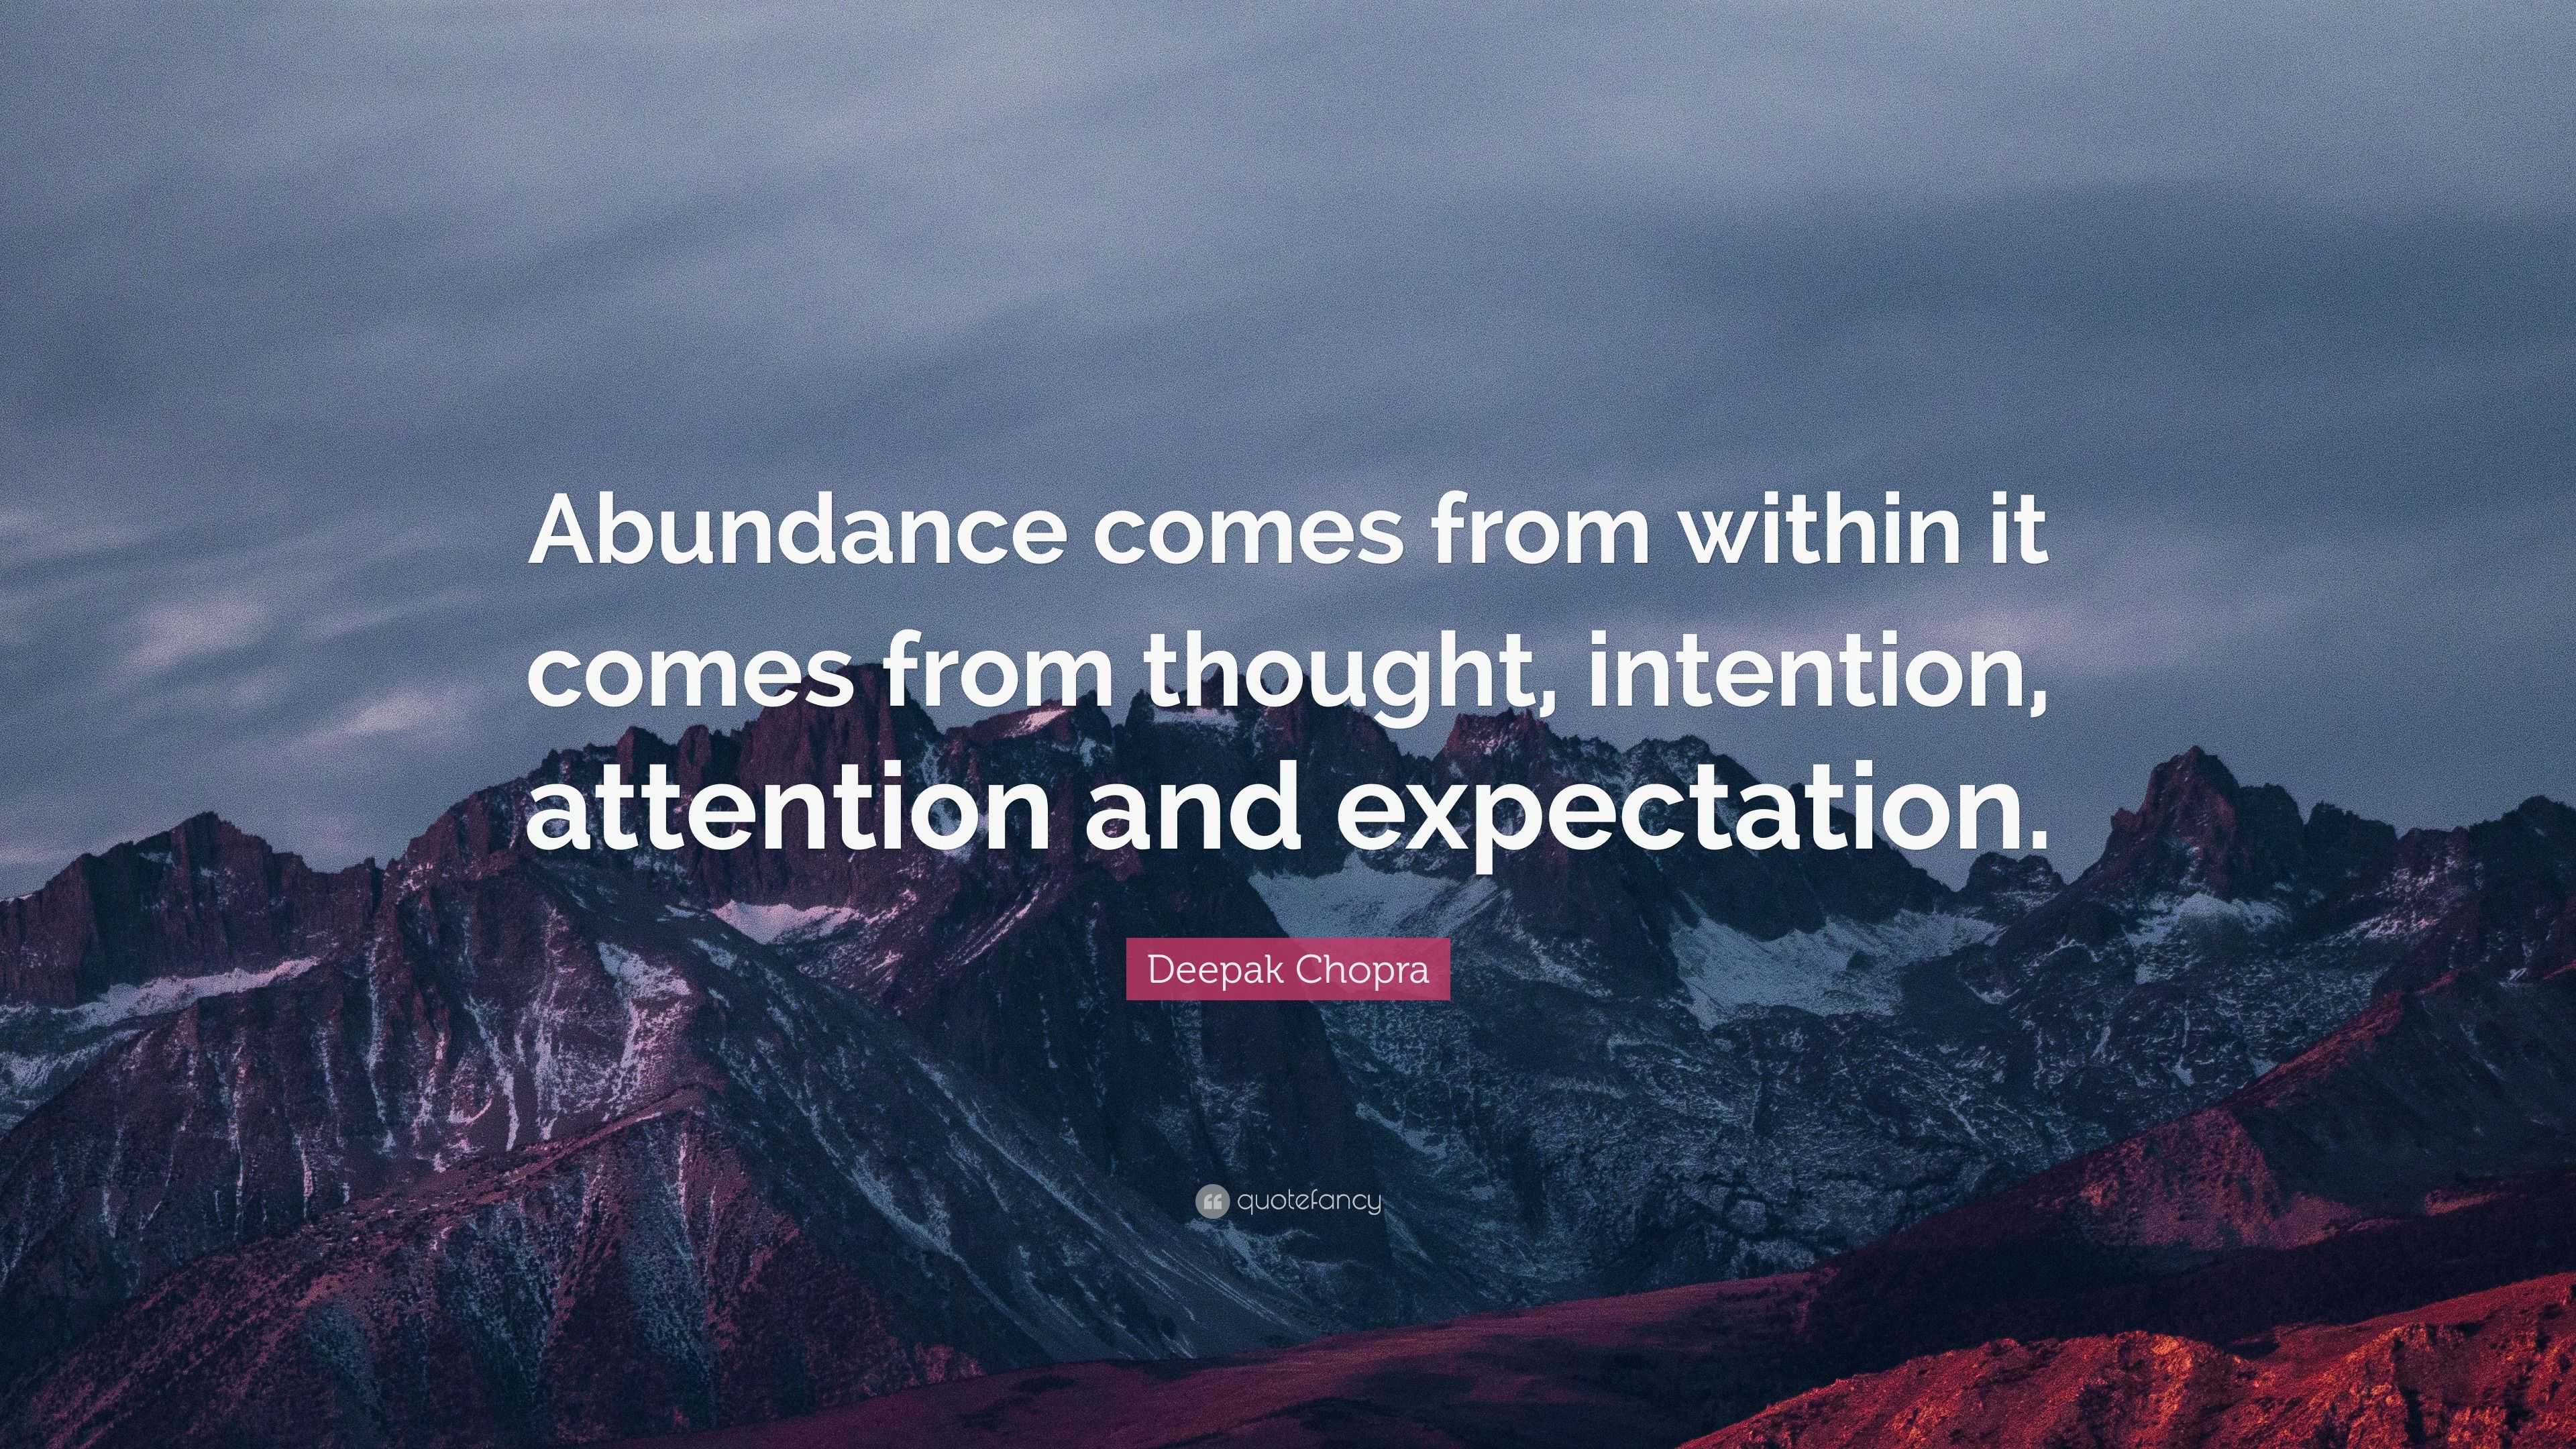 2378990 Deepak Chopra Quote Abundance comes from within it comes from